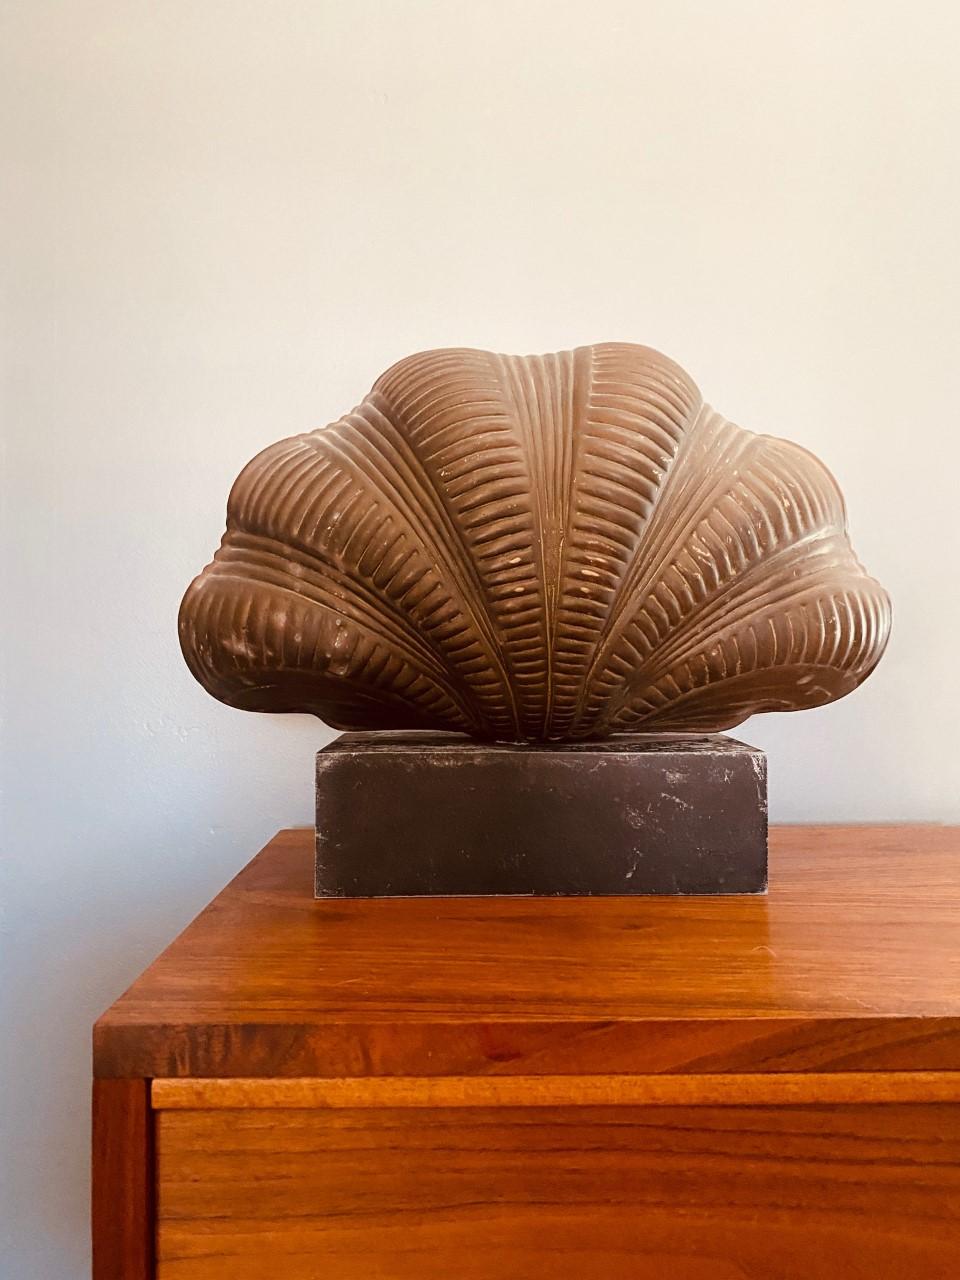 Organically beautiful and sculptural. This 1970s piece by Chapman is a style statement that brings form and function to your décor. Beautifully sculpted in brass, this sculpture rests over a metal base that solidifies its presence. Stylish and